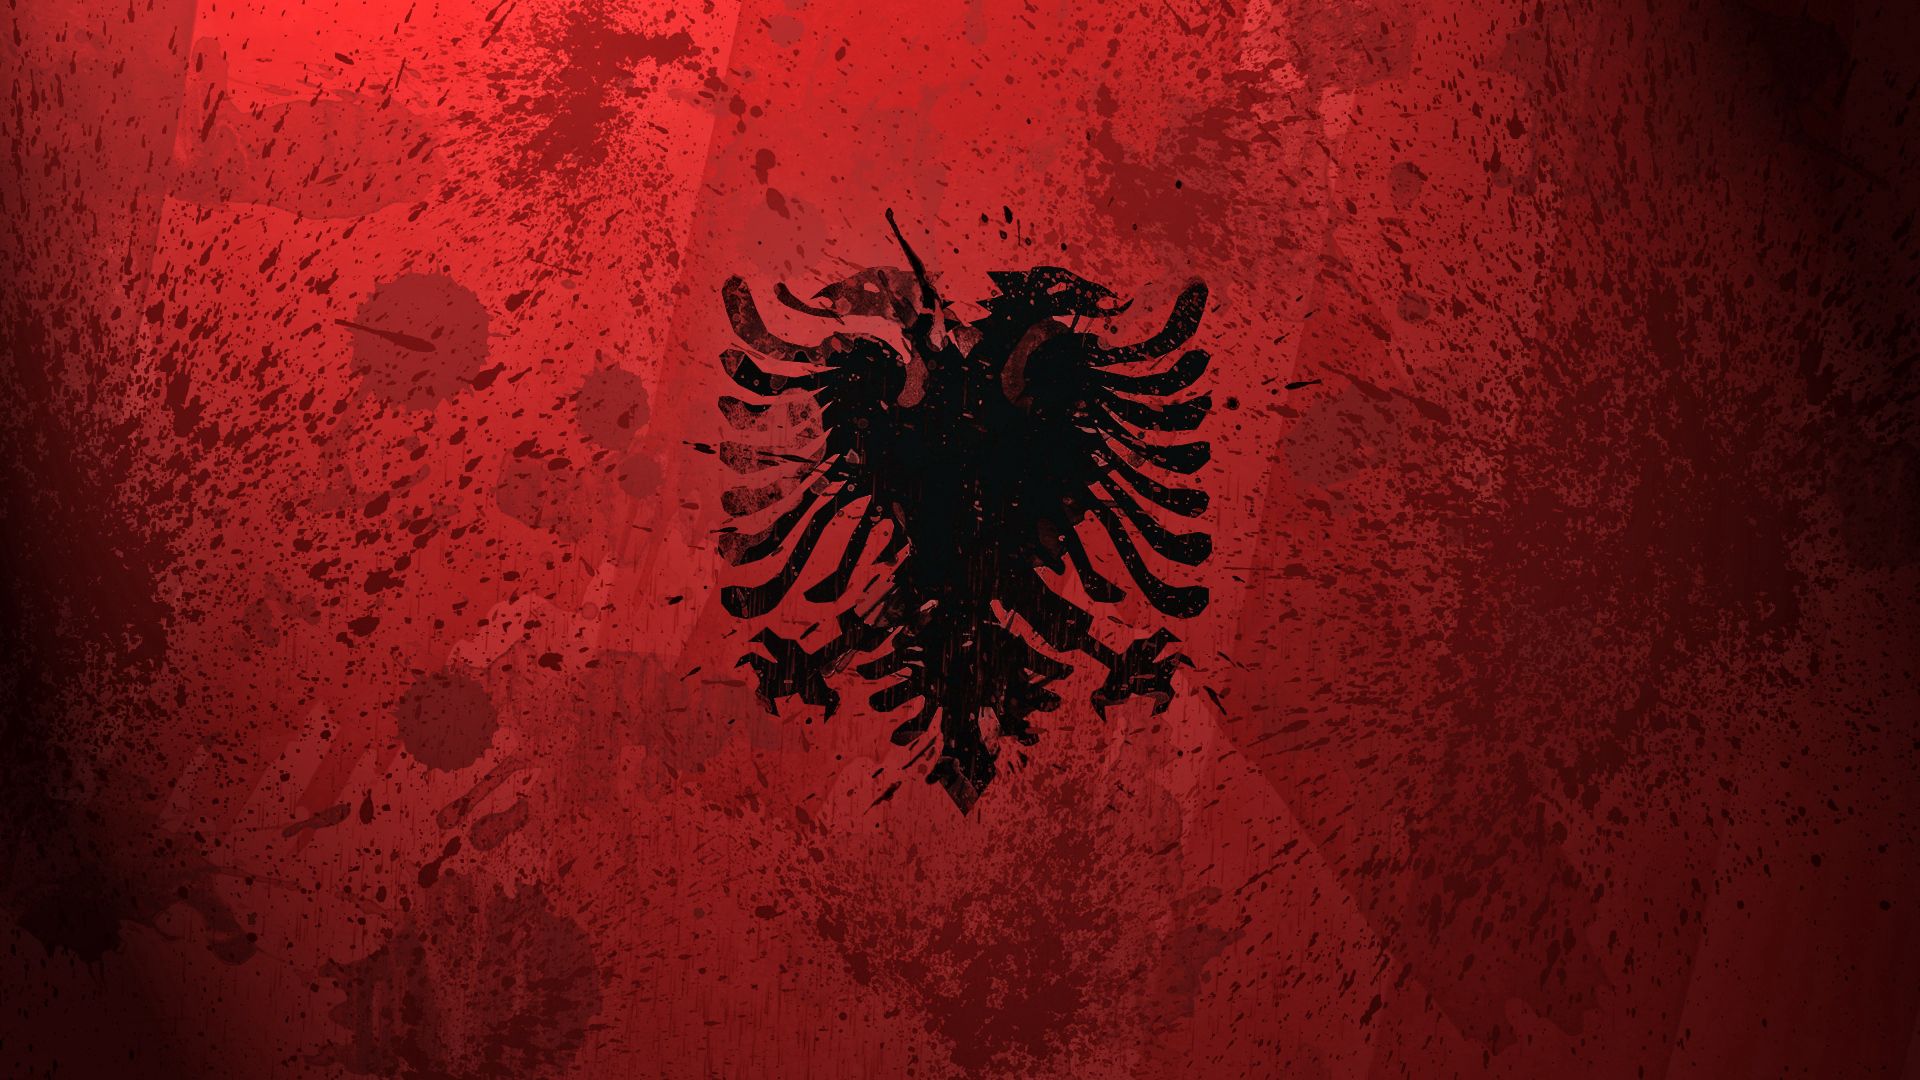 background, texture, textures, paint, flag, symbolism, coat of arms, albania